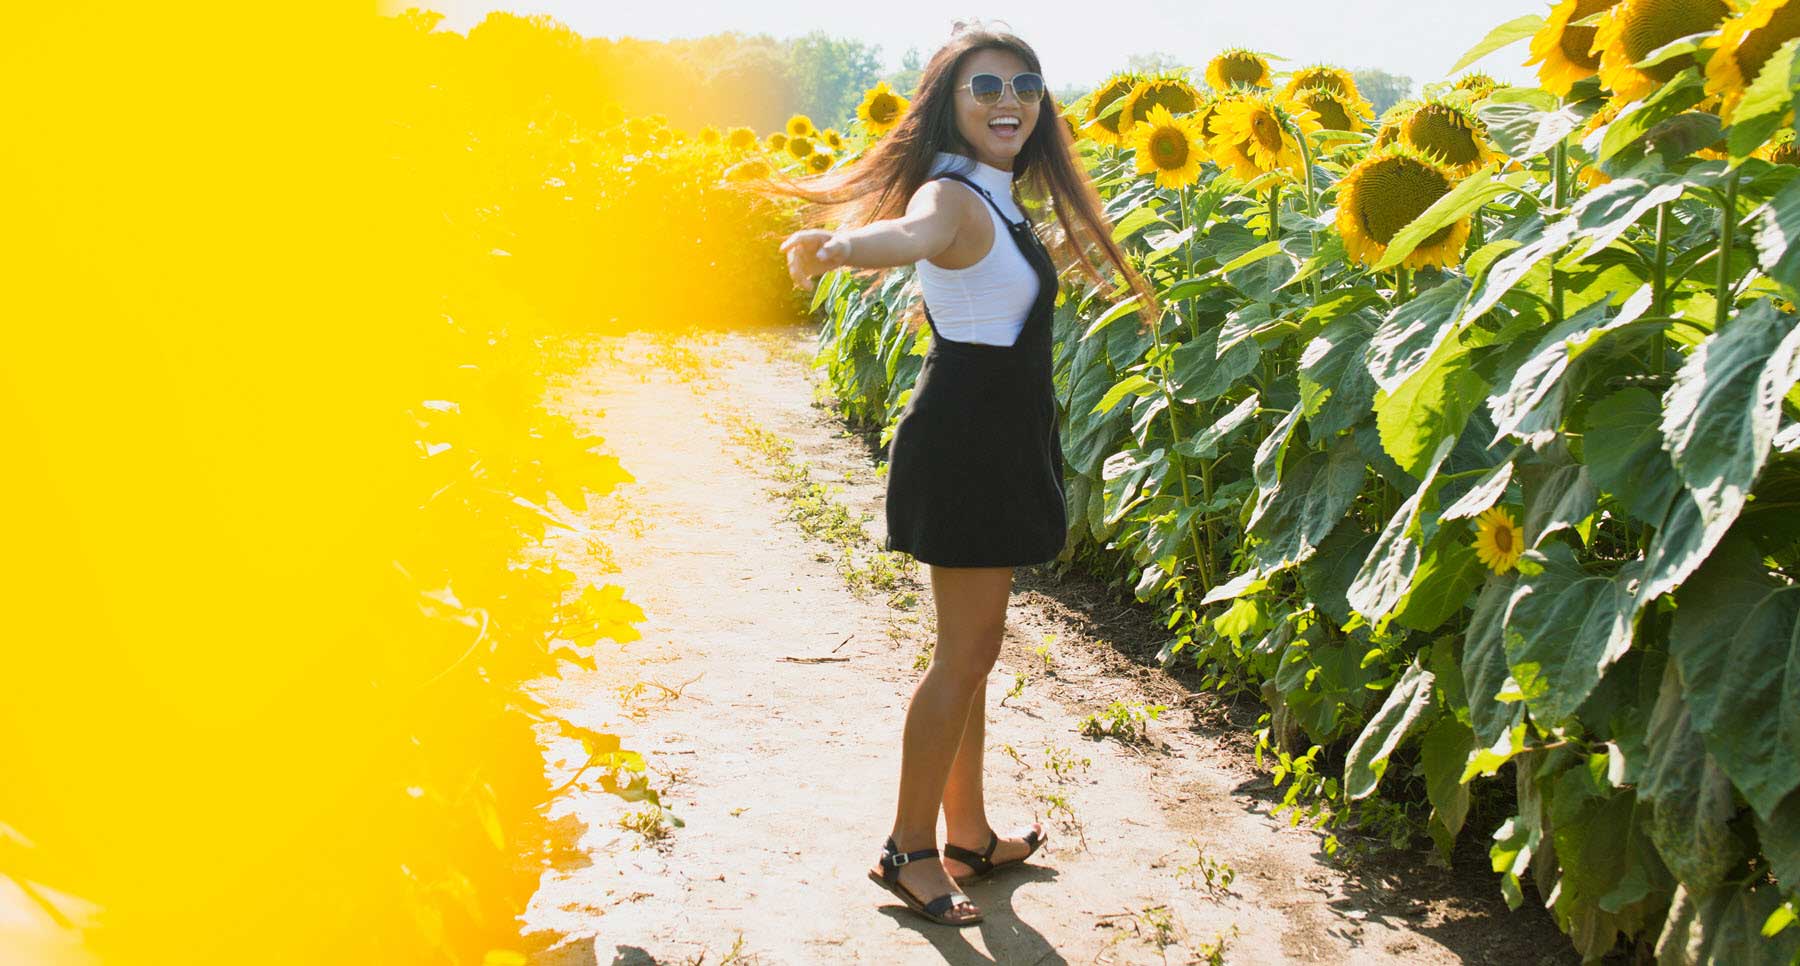 Girl-smiling-in-a-field-of-sunflowers